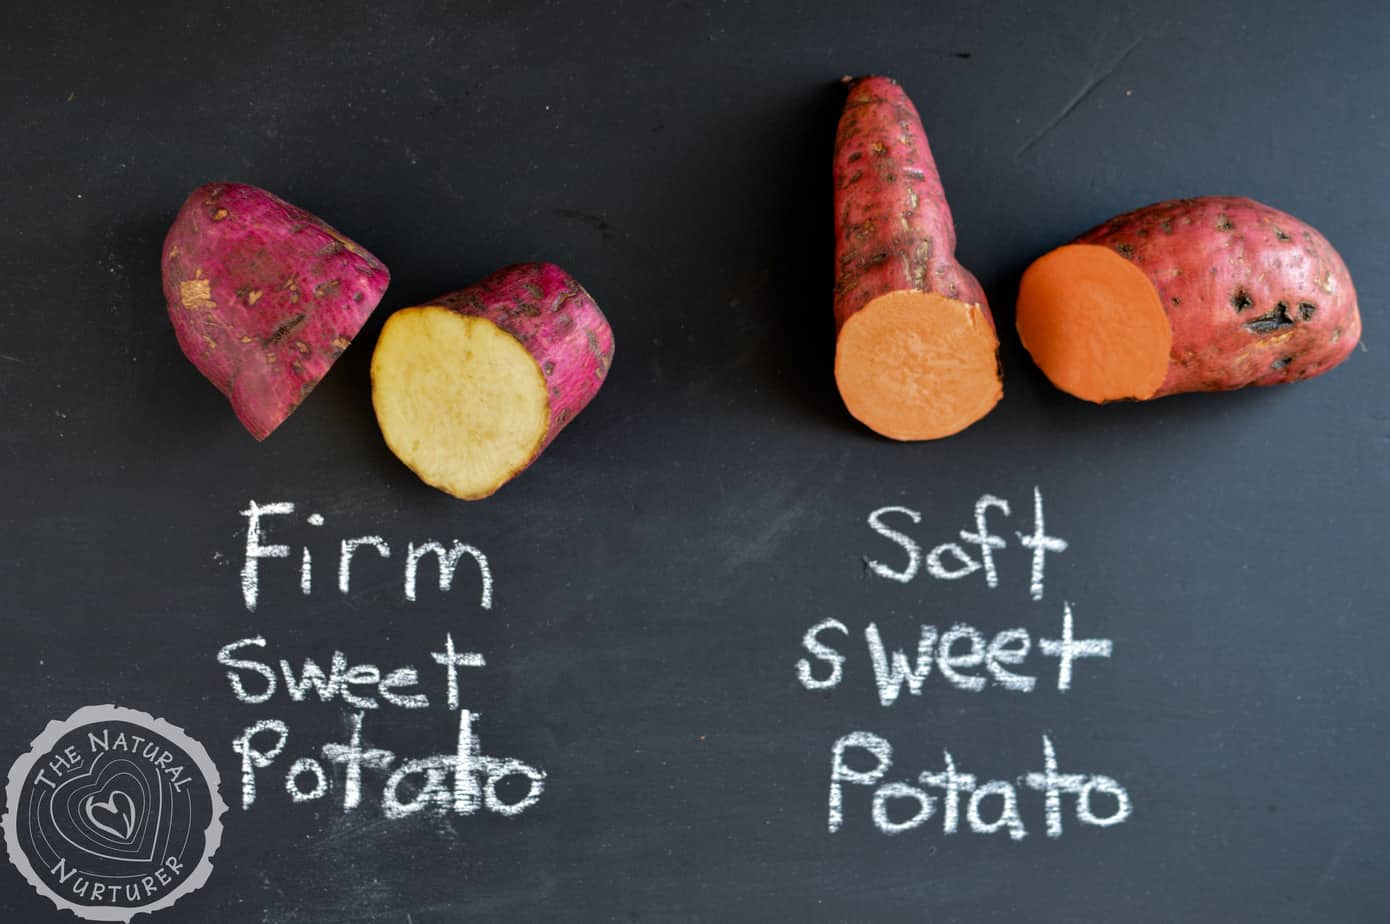 Two pieces of firm sweet potato next to the two pieces of soft sweet potato.